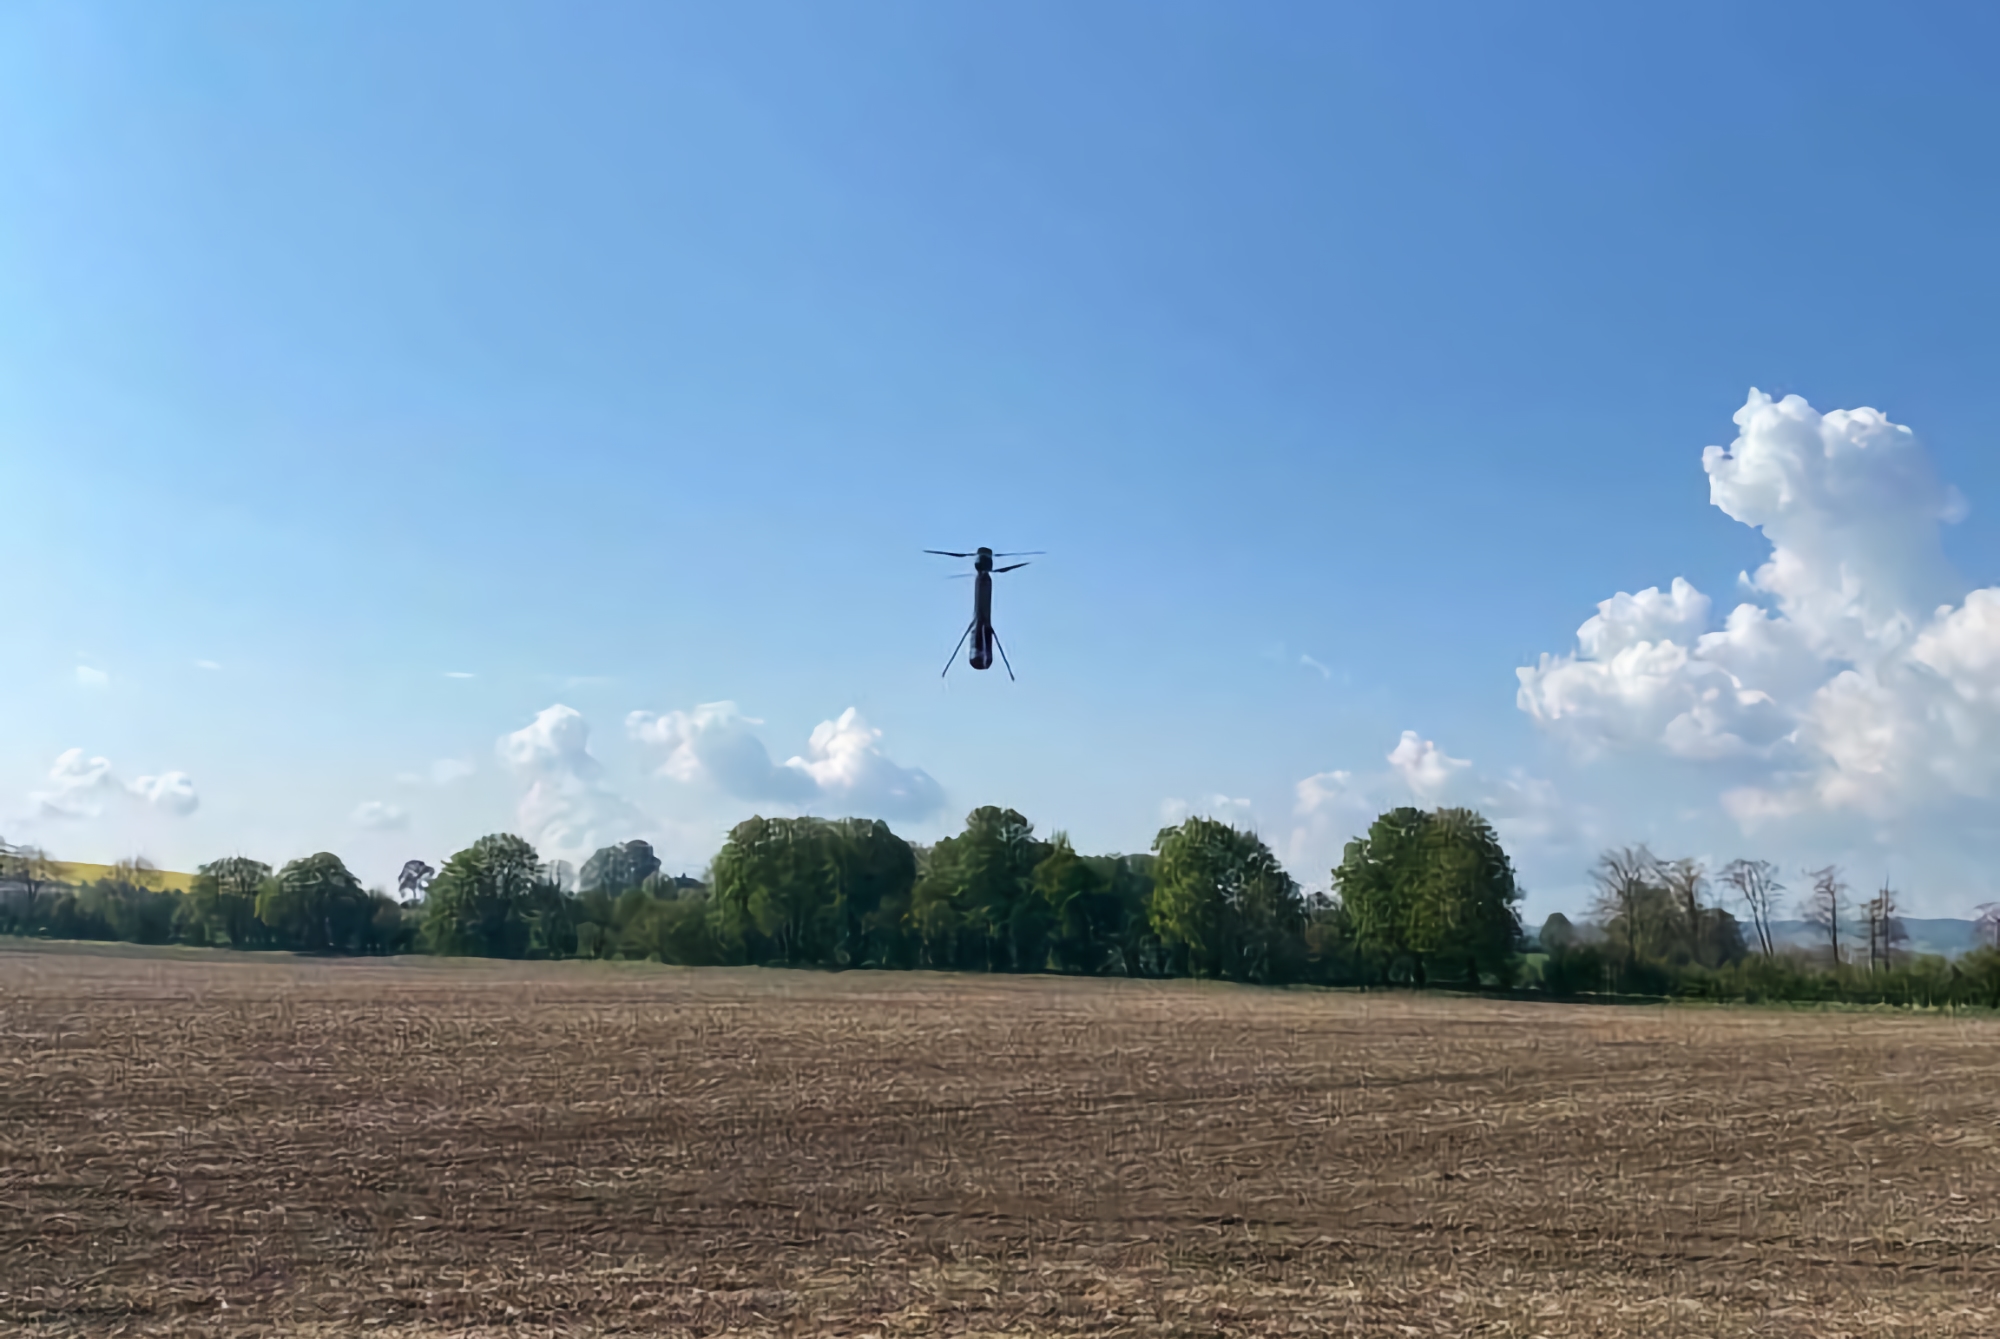 In service with the Armed Forces of Ukraine, they noticed an unusual kamikaze drone with a vertical take-off system. It could be a rare PHOLOS UAV